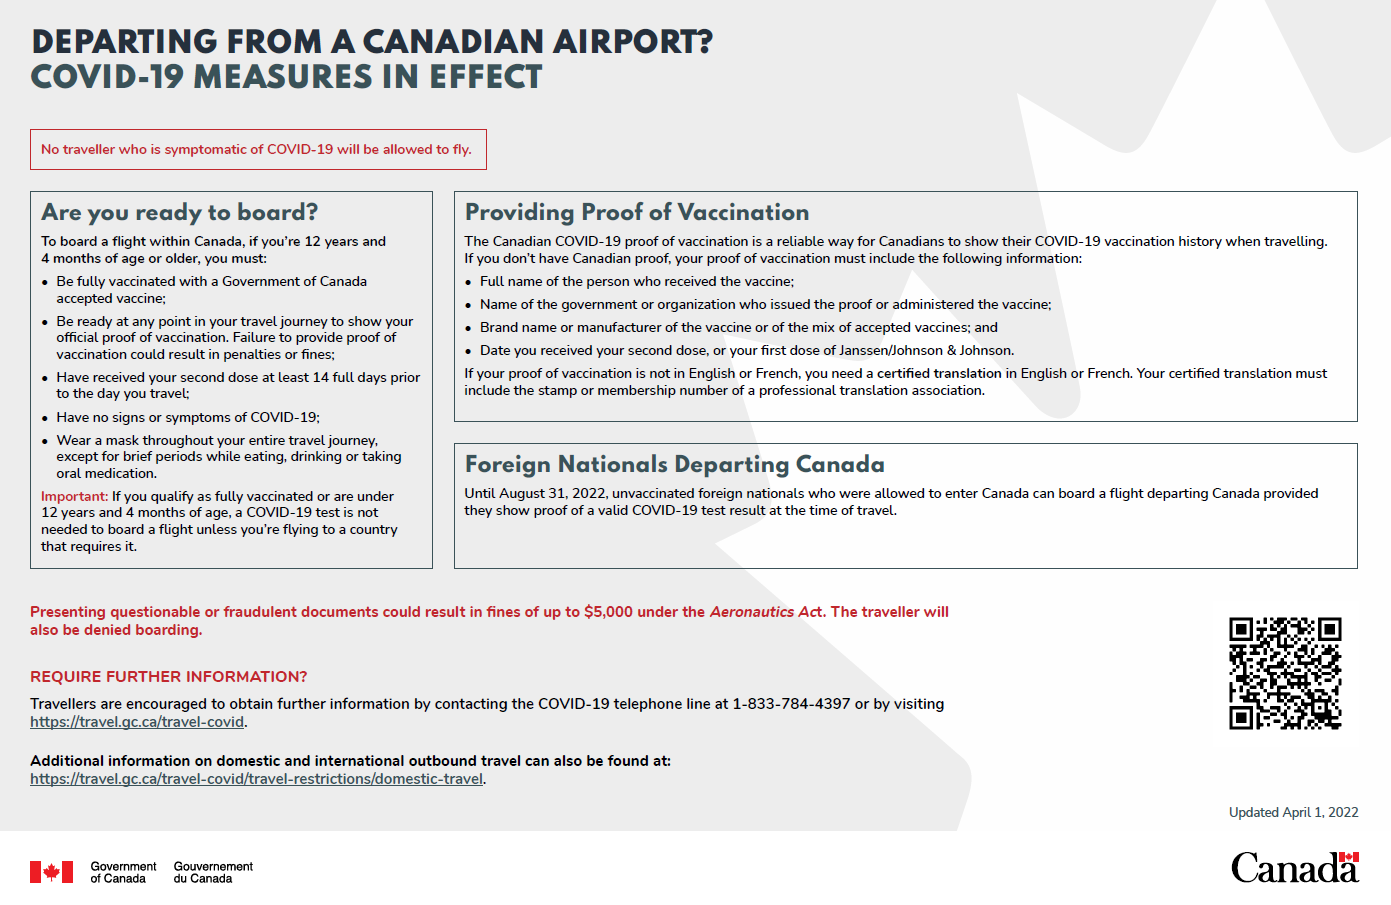 Poster - Departing from a Canadian airport